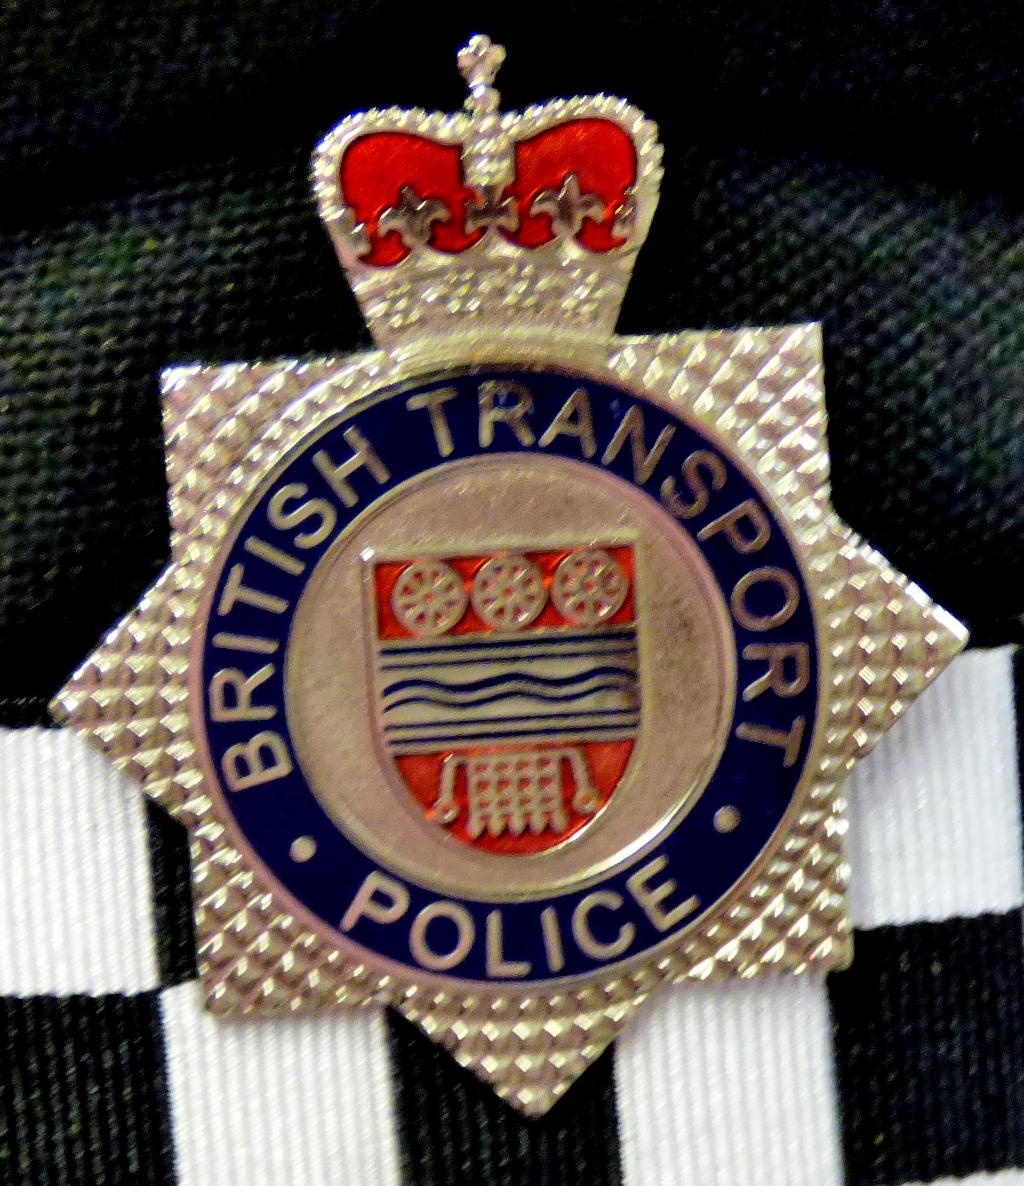 British Transport Police Service Cap, size 58 in excellent condition - Image 2 of 2